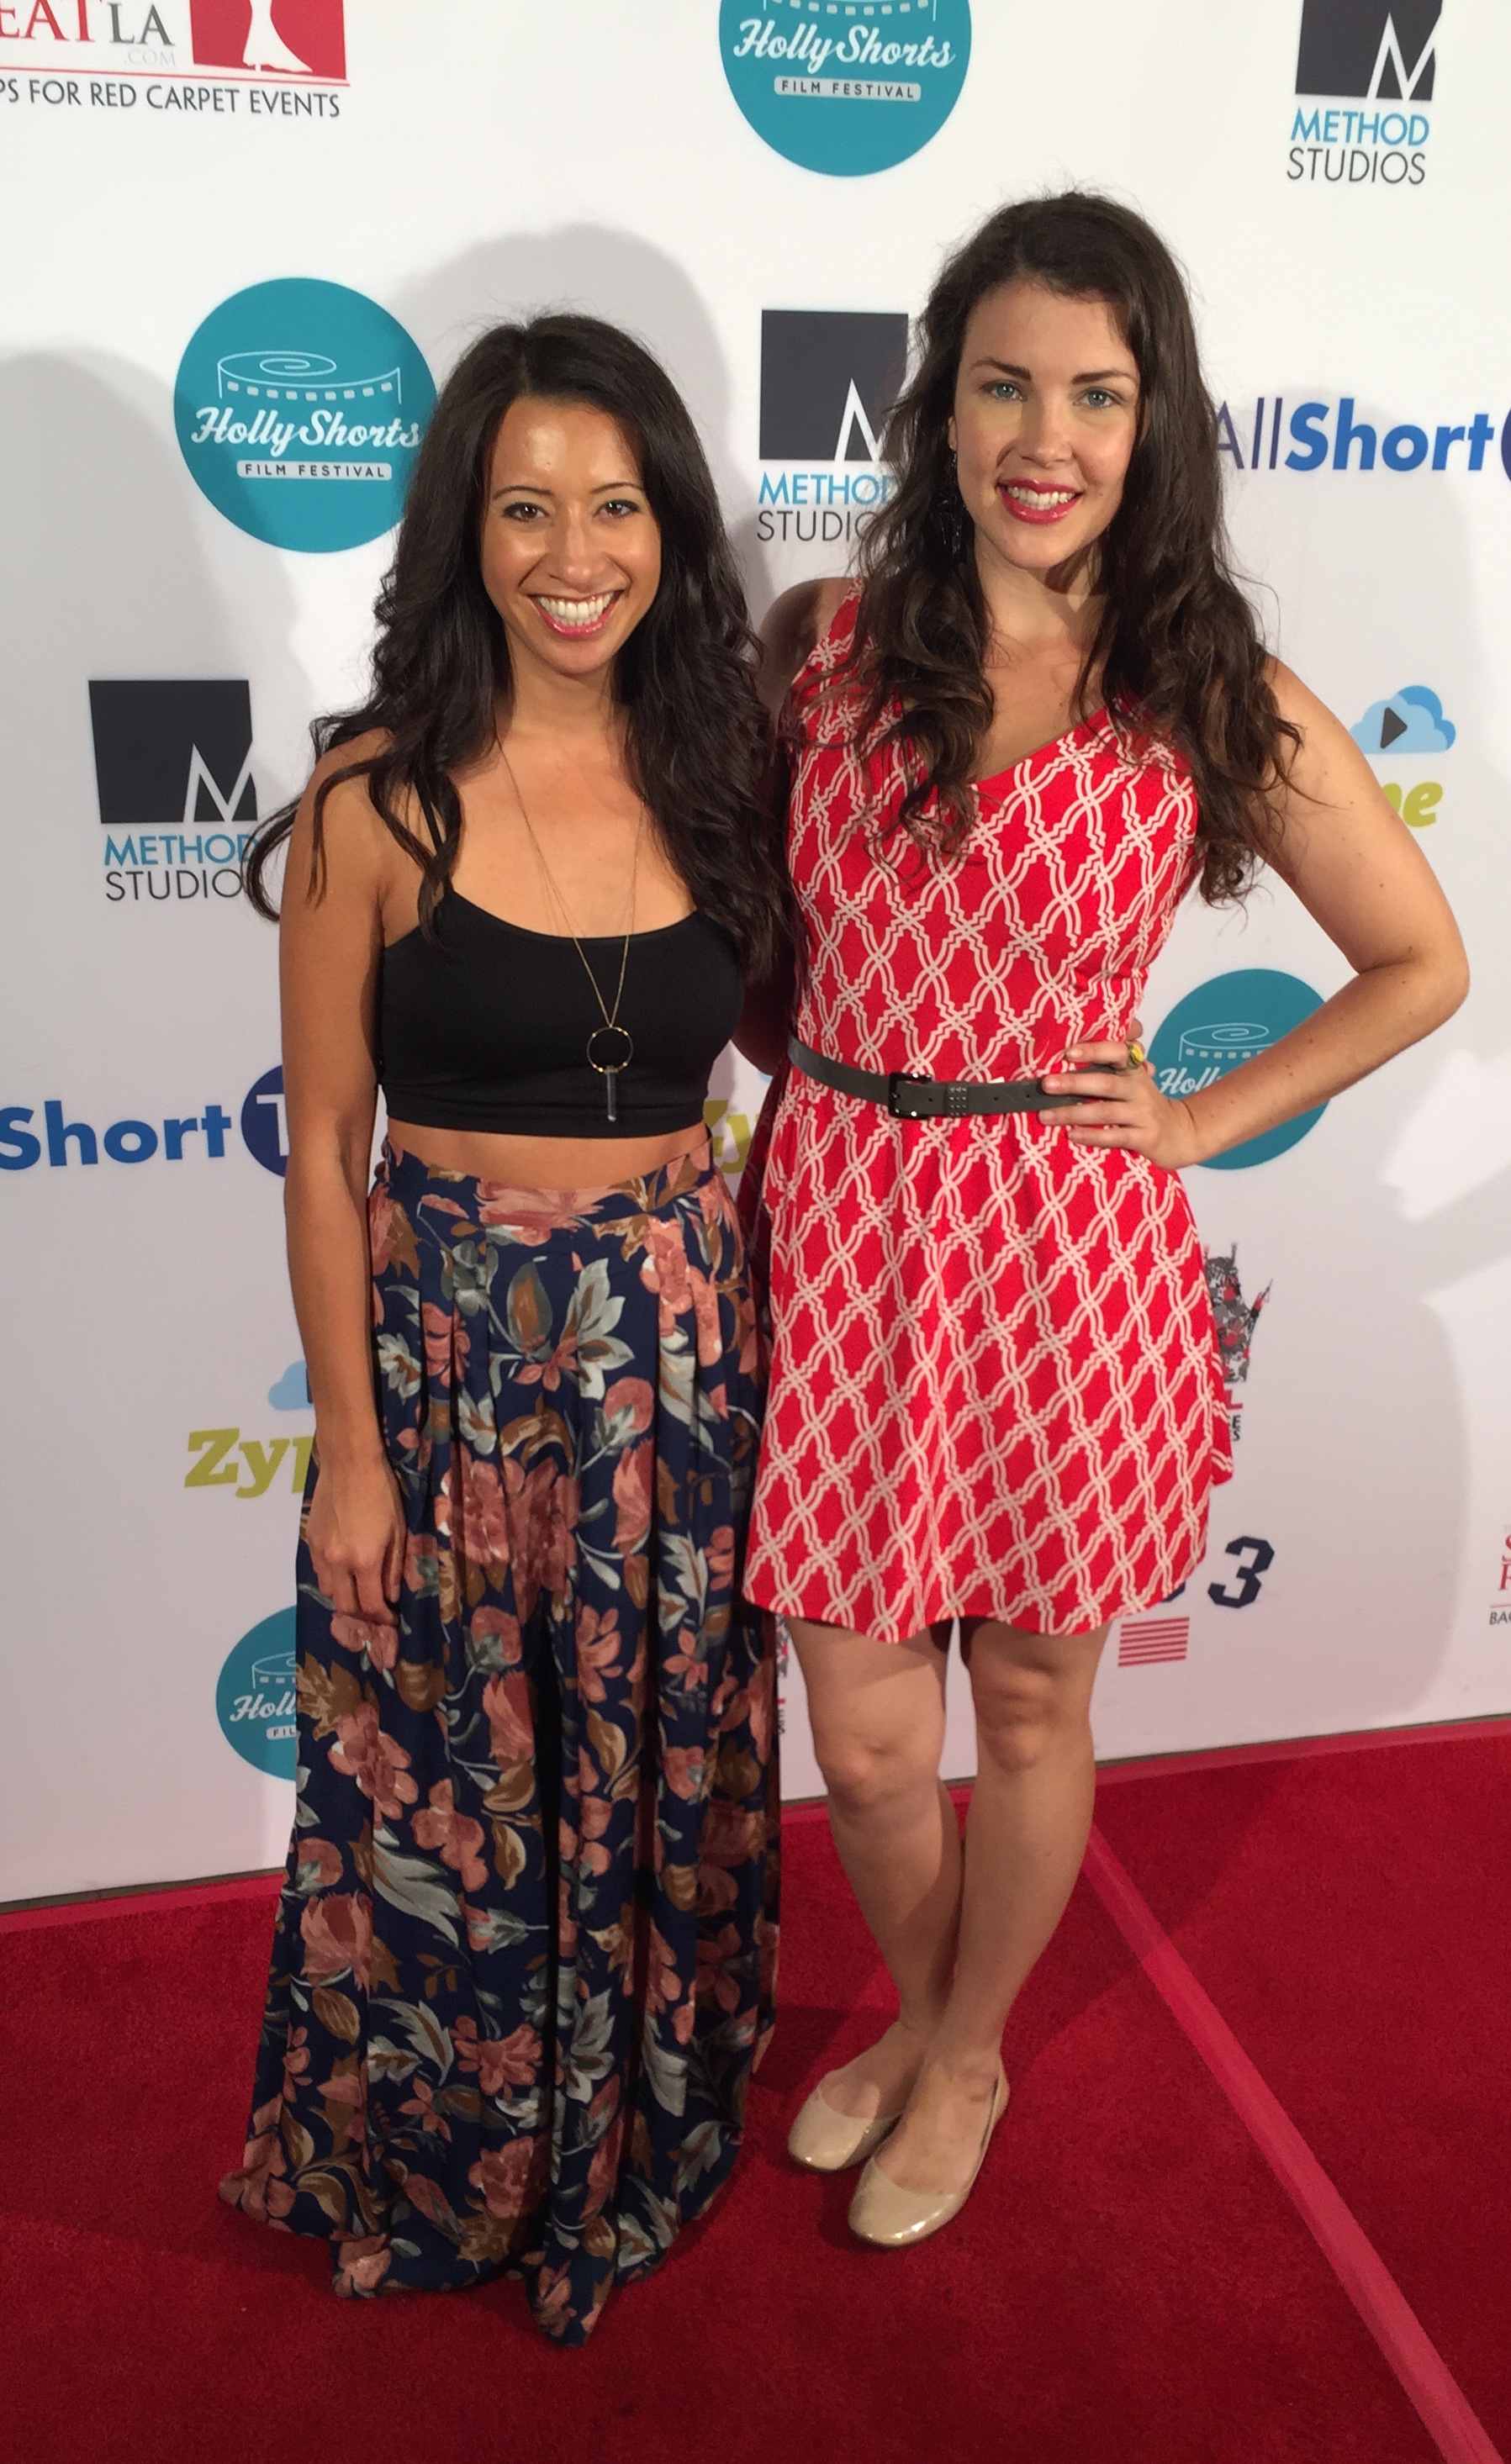 Helenna and co-star Madeline Merritt attend the world premiere of the experimental short film 